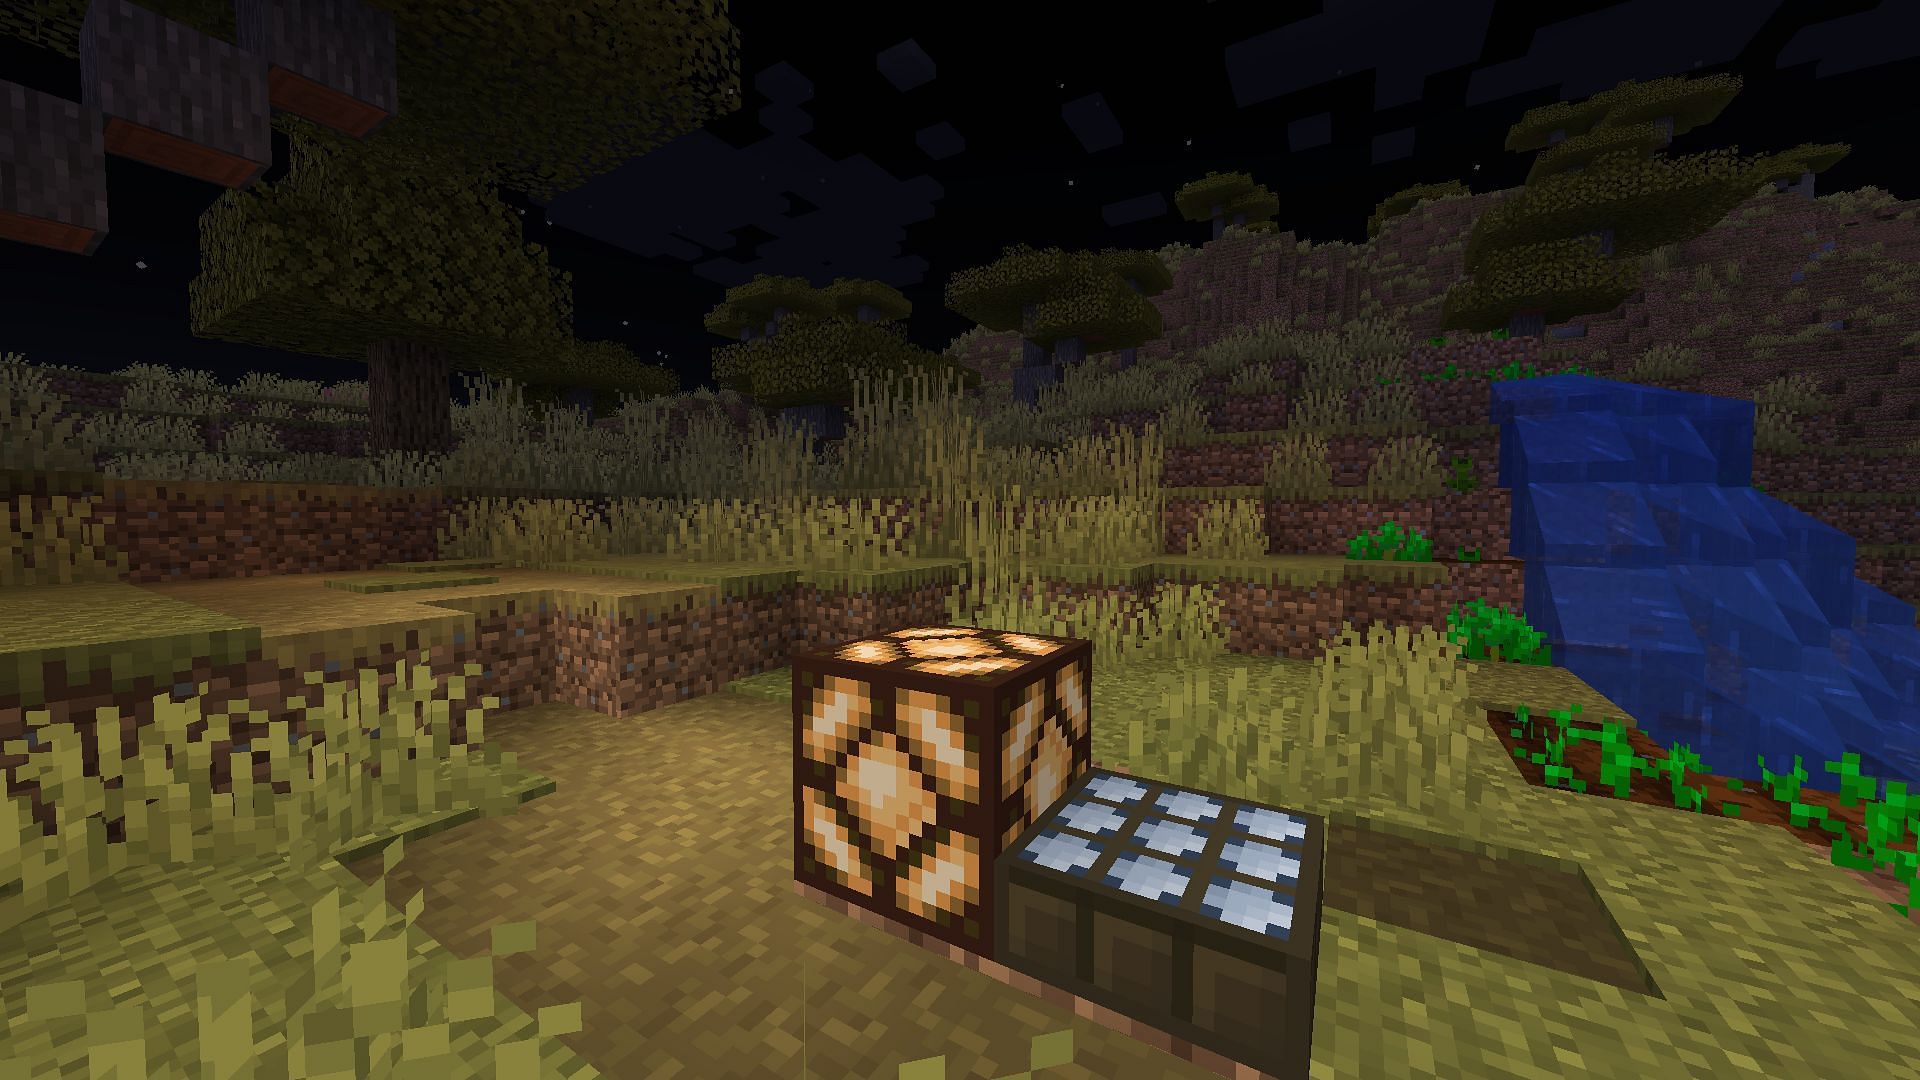 Redstone lamp can automatically light up at night with a daylight sensor in Minecraft (Image via Mojang)